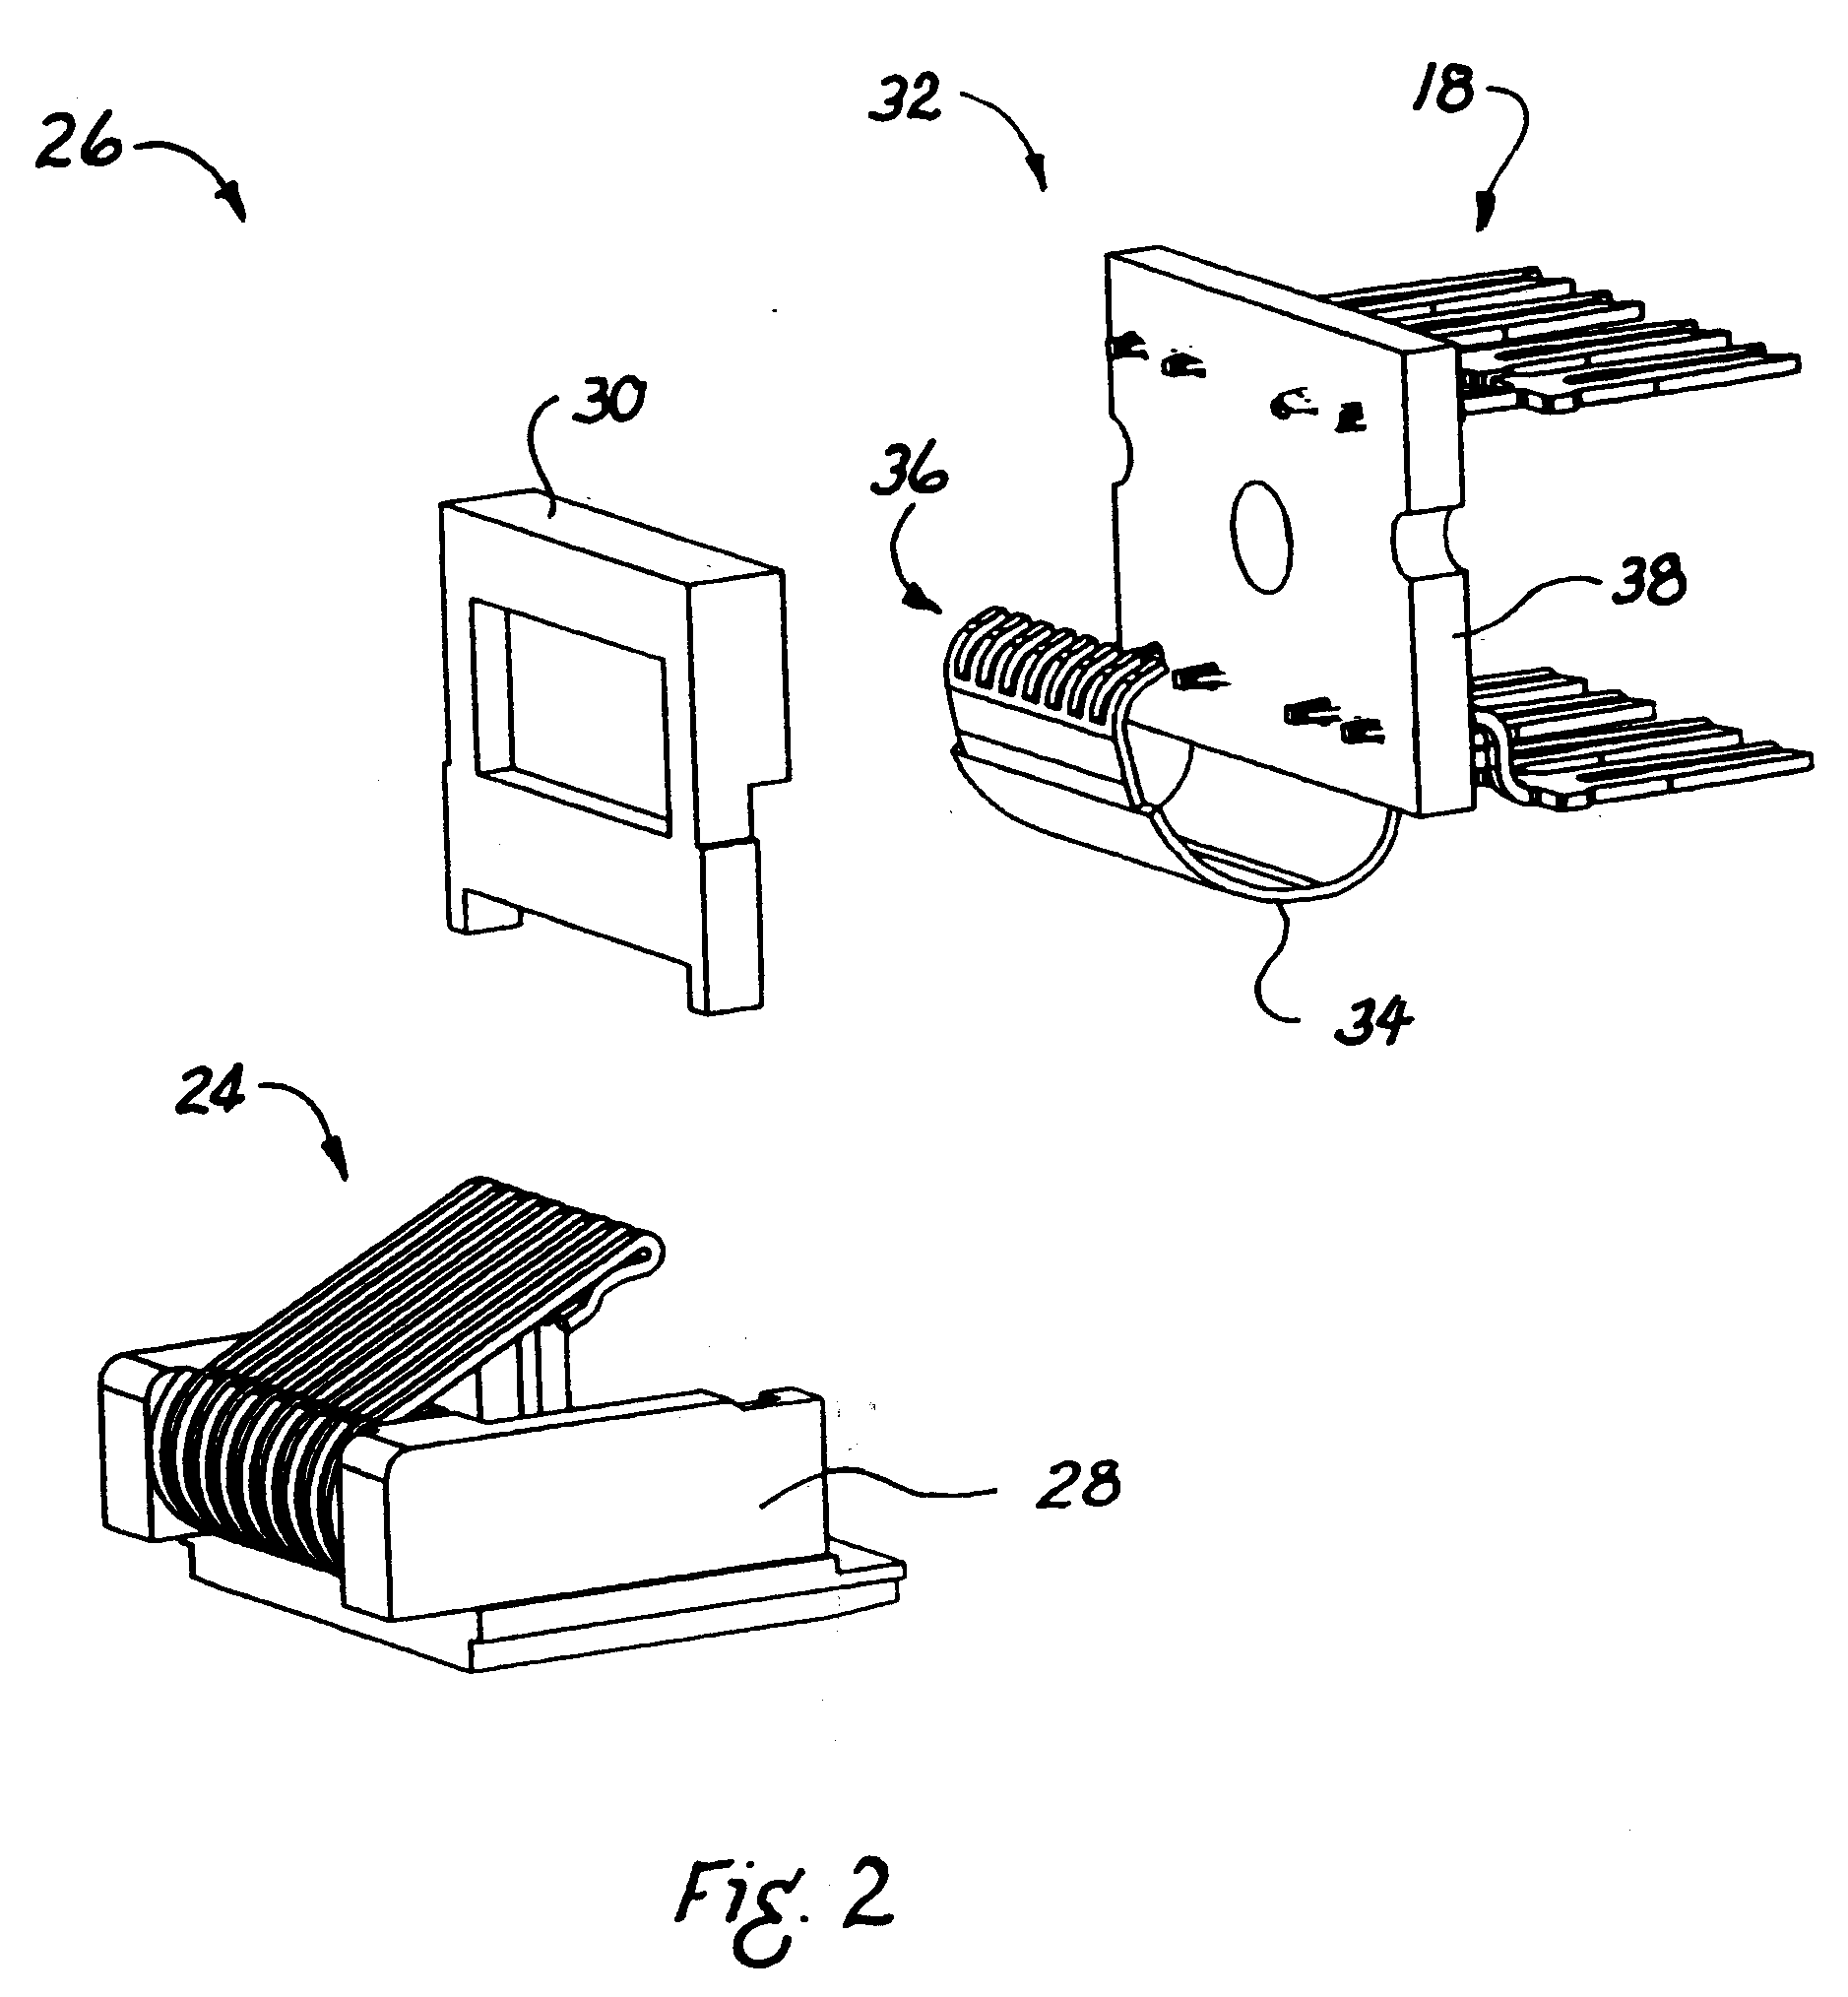 Communications connector with crimped contacts